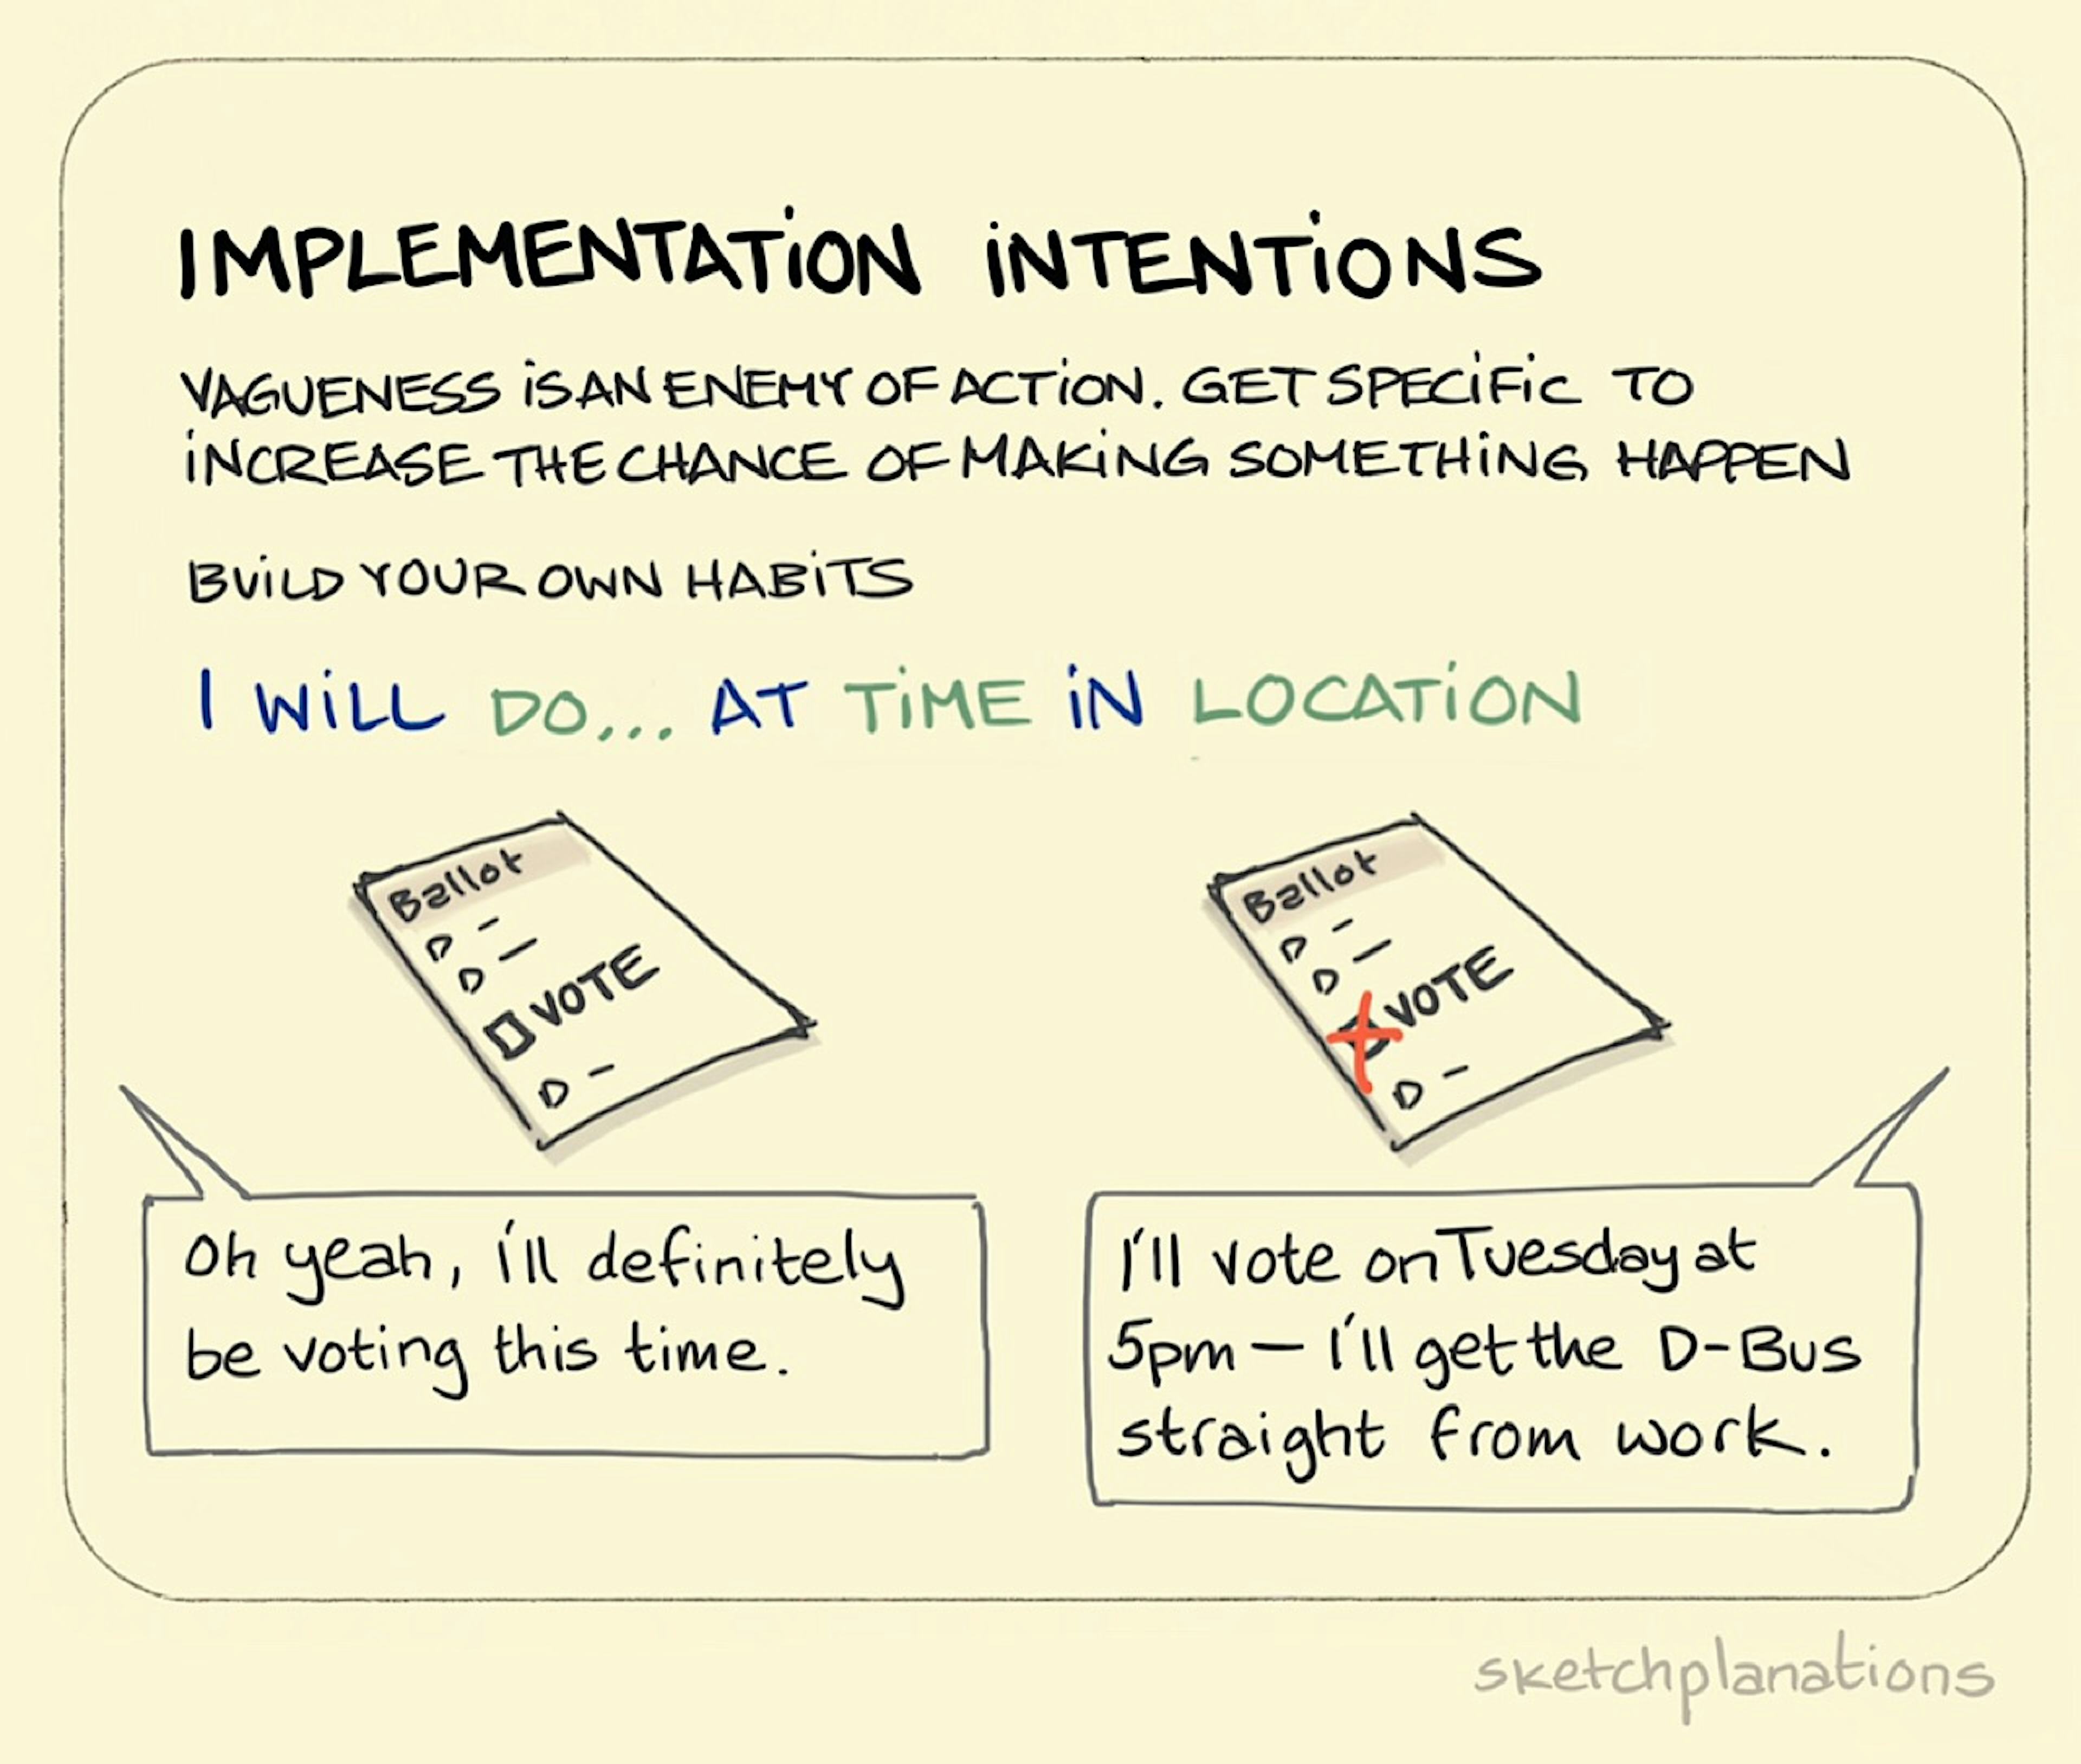 Implementation Intentions illustration: A blank ballot paper is shown as the result of vague plan to vote at some point. A completed ballot paper demonstrates how a specific logistical plan on when, where and how they'll get to the polling station got the job done. 